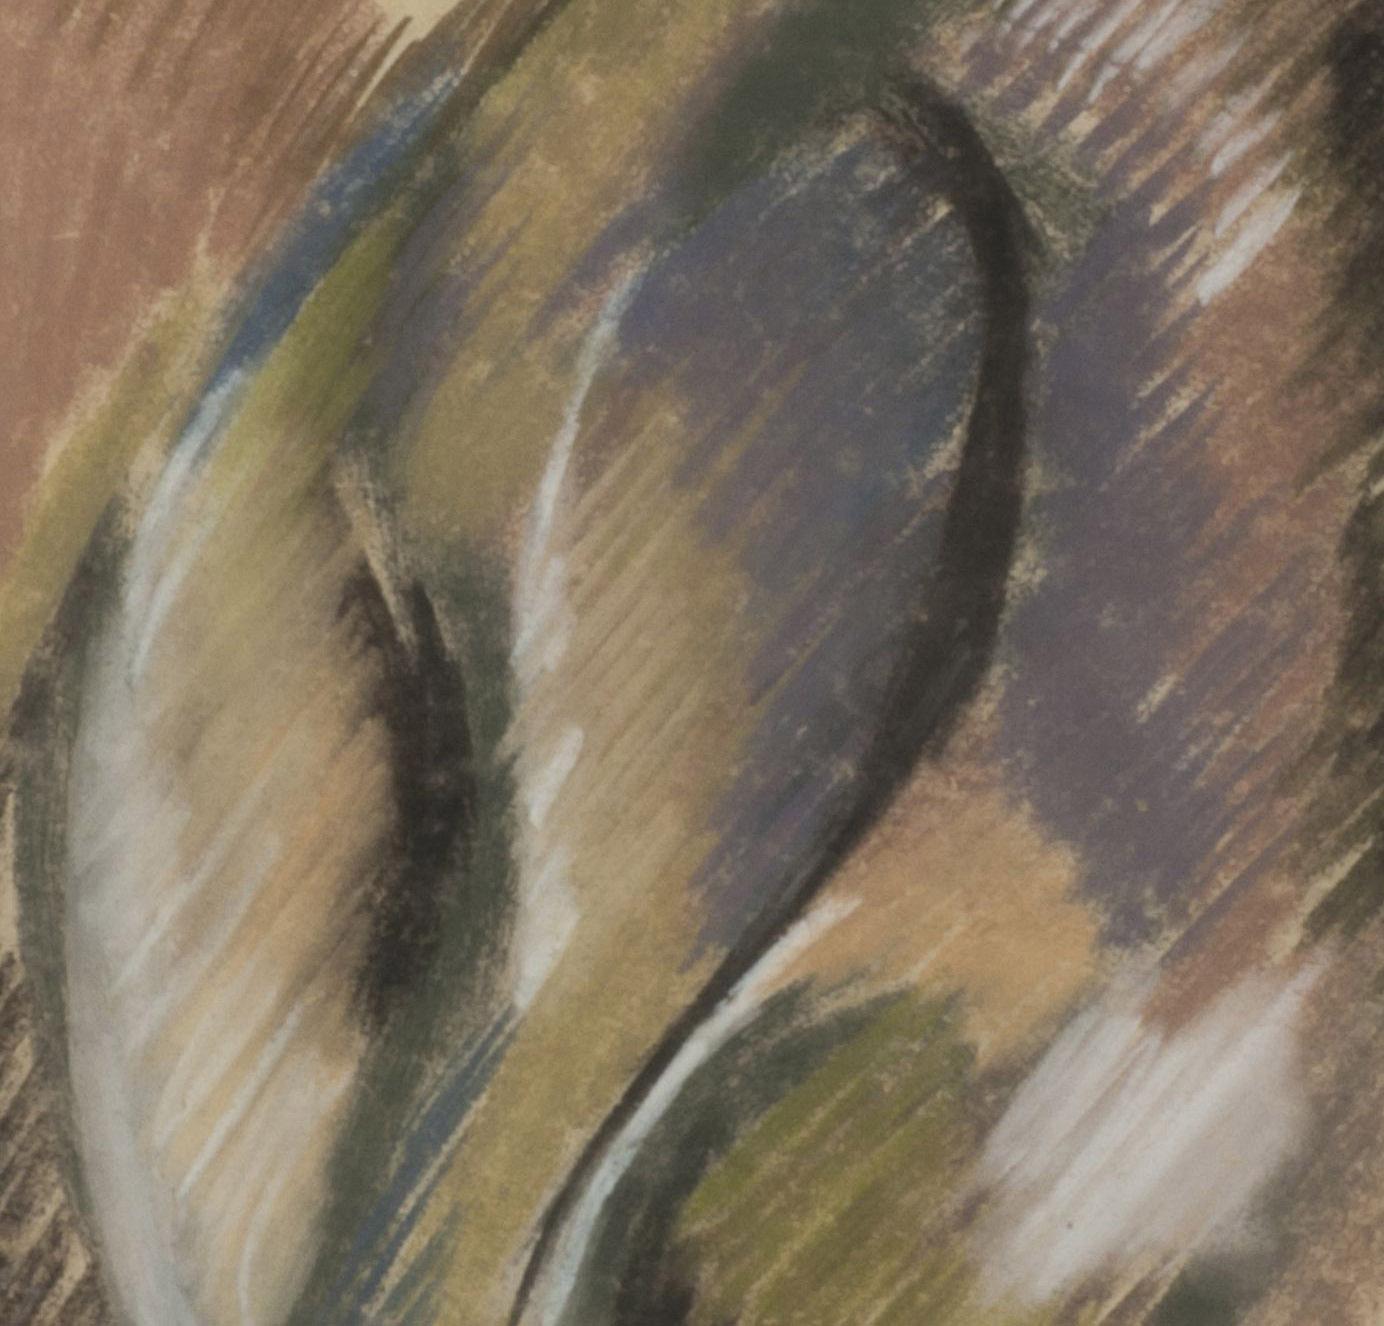 Untitled
Pastel on paper, 1922
Initialed lower right (see photo)
Exhibited: Francis Nauman, Leon Kelly: Draftsman Extraordinaire, New York, April 4 - May 23, 2014. 
Condition: Excellent
Sheet: 10 1/8 x 8 7/8